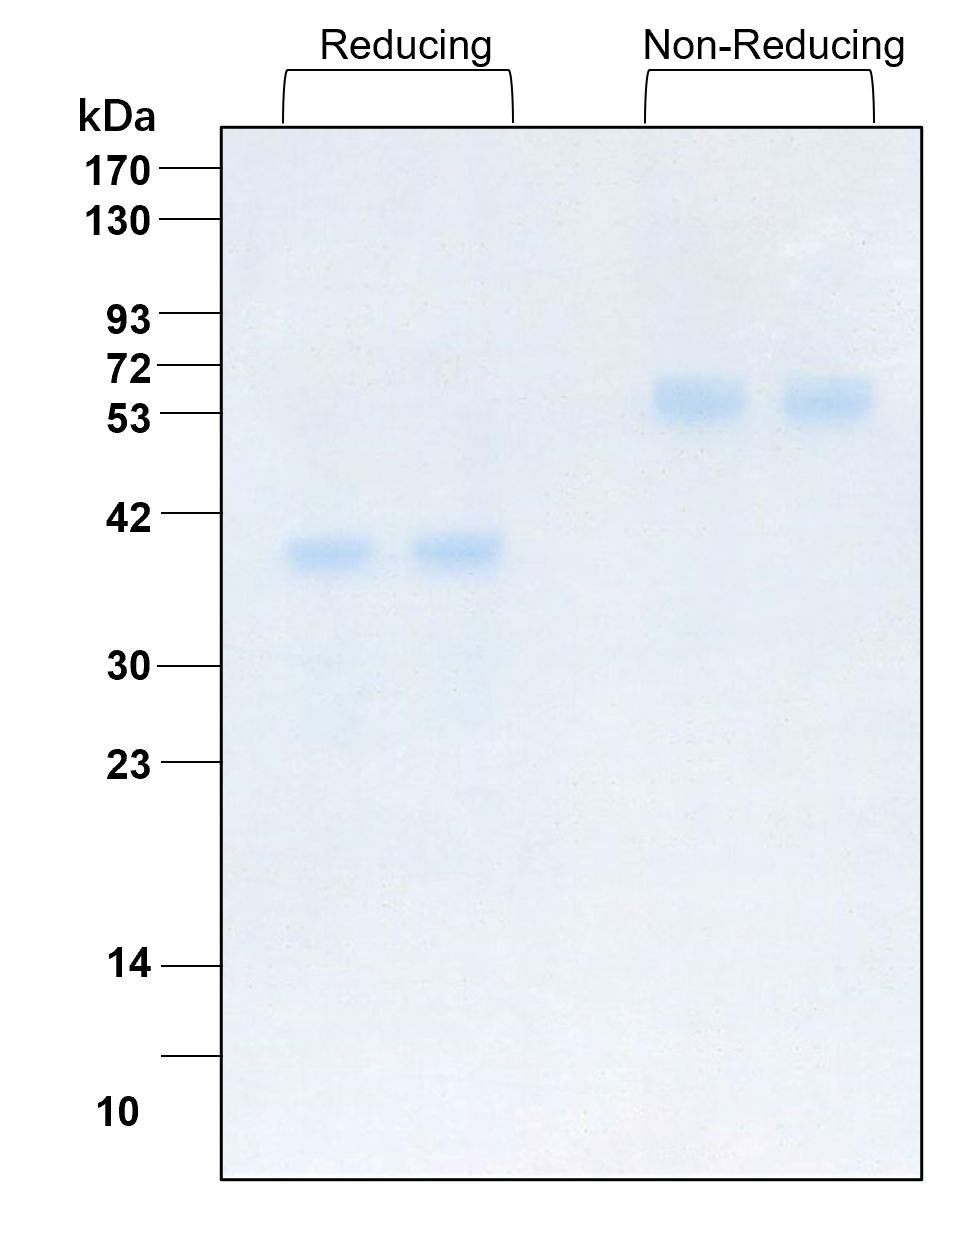 Purity of recombinant human IL-12 was determined by SDS- polyacrylamide gel electrophoresis. The protein was resolved in an SDS- polyacrylamide gel in reducing and non-reducing conditions and stained using Coomassie blue.